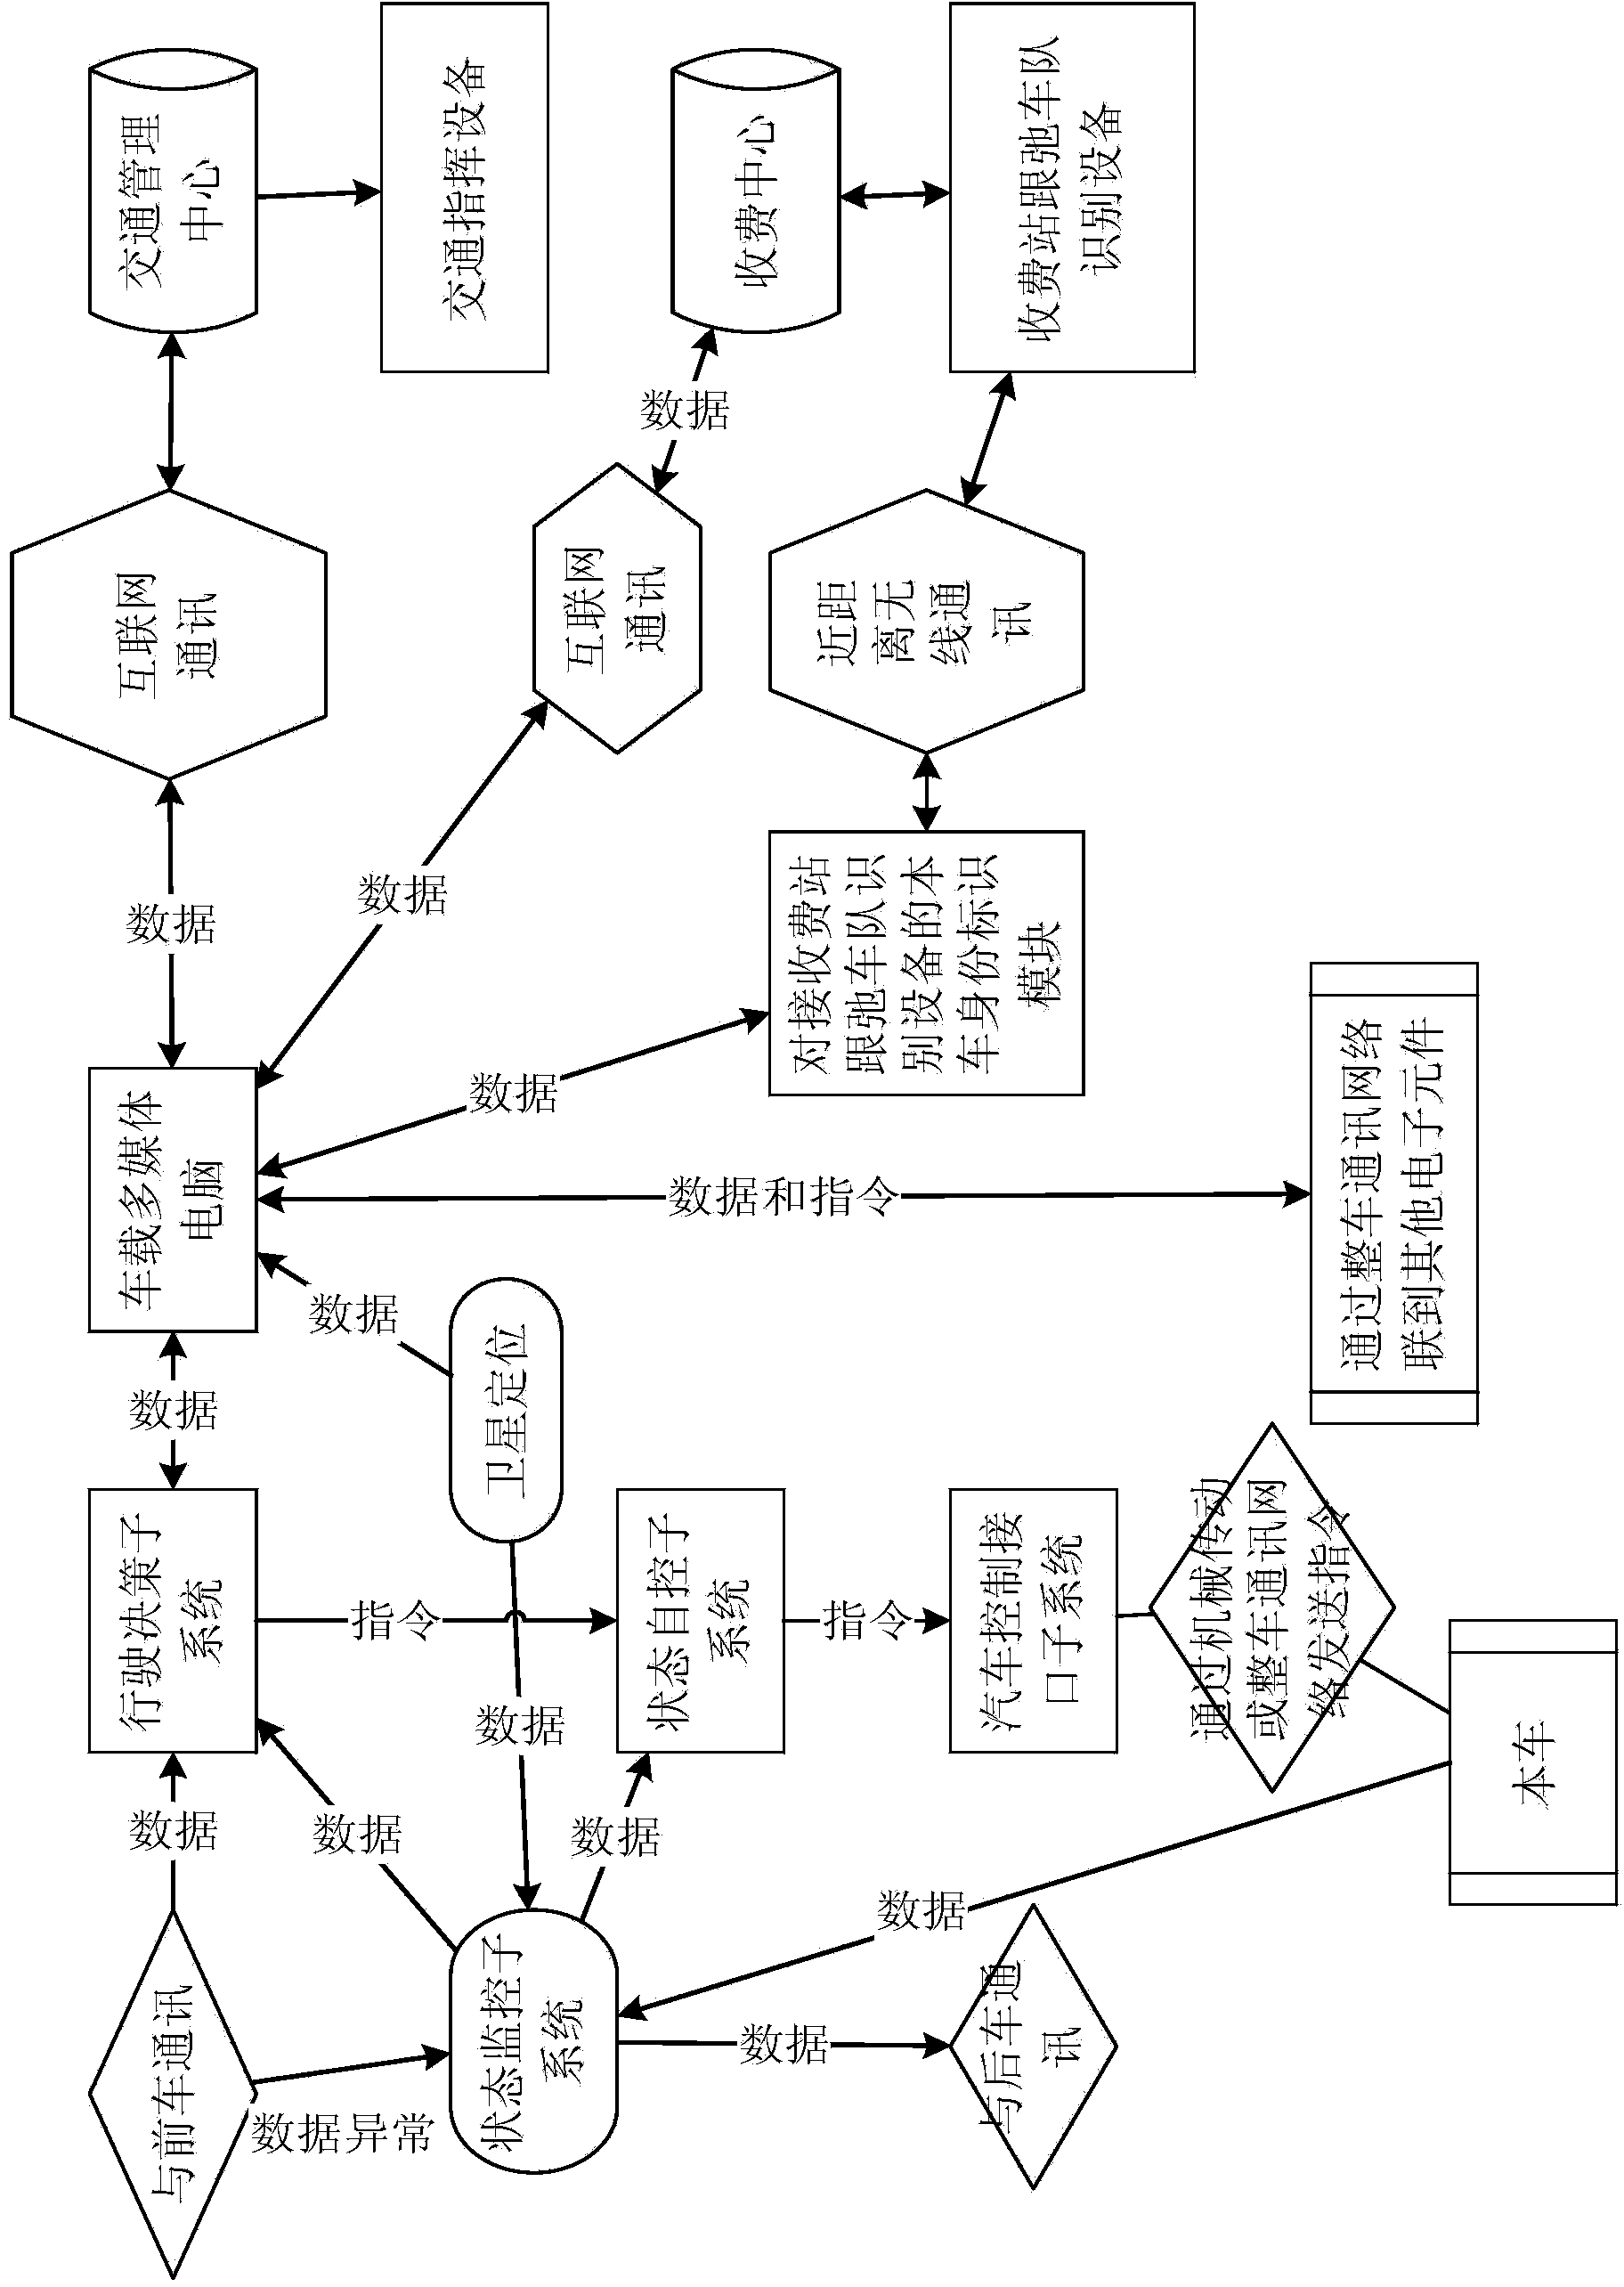 Traffic control method and system combining car networking and follow running conversion